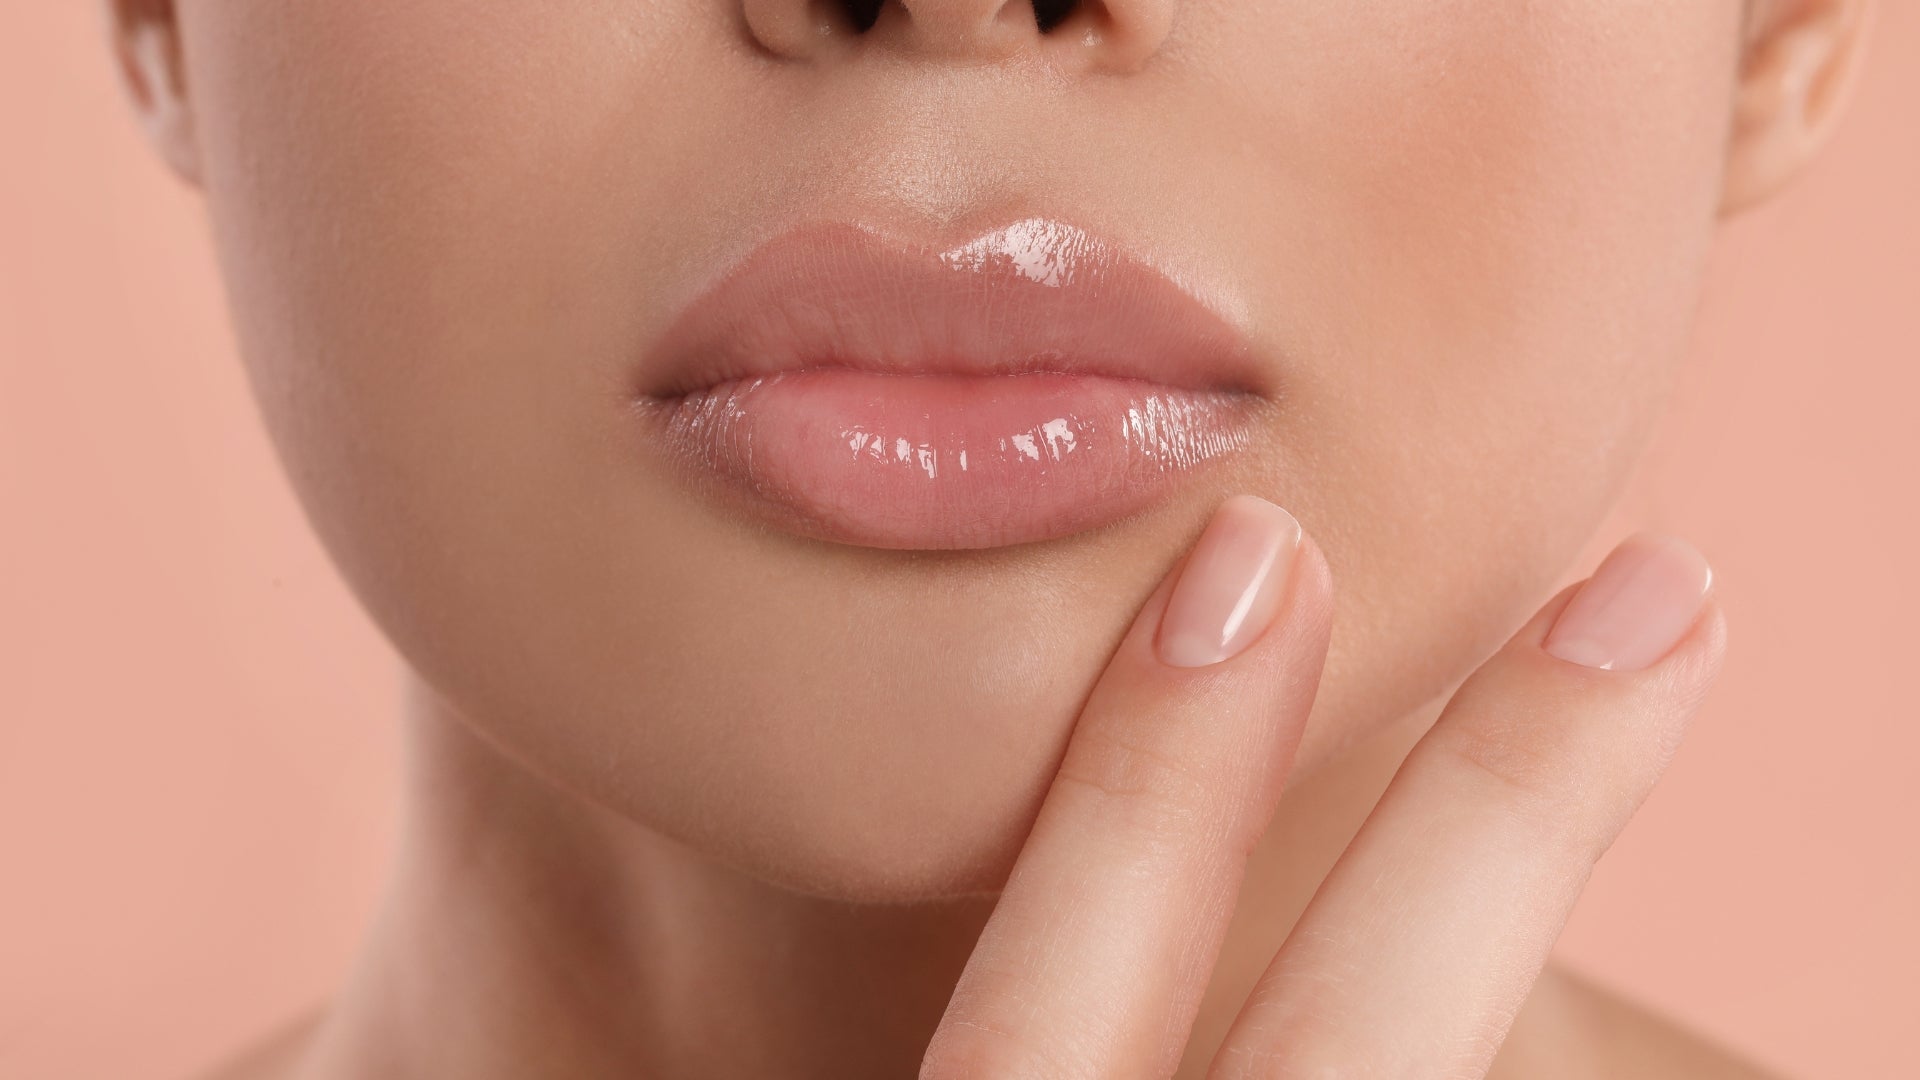 Tips for Taking Care of Your Lips